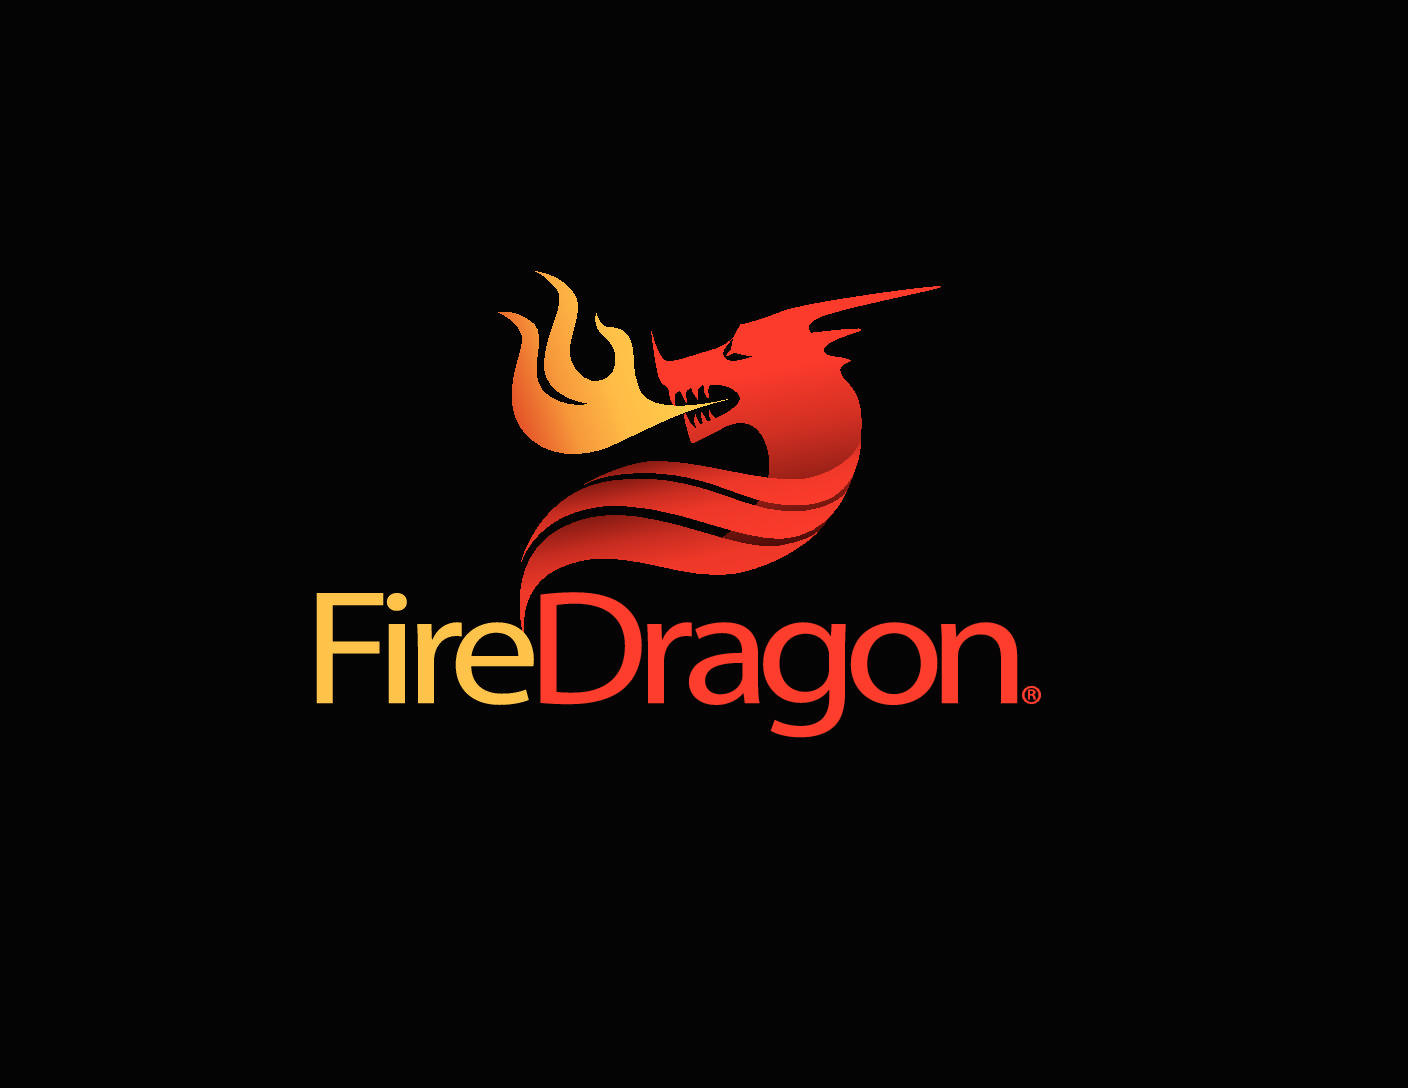 (Sponsored) Firewalls, Security, And FireDragonSecurity